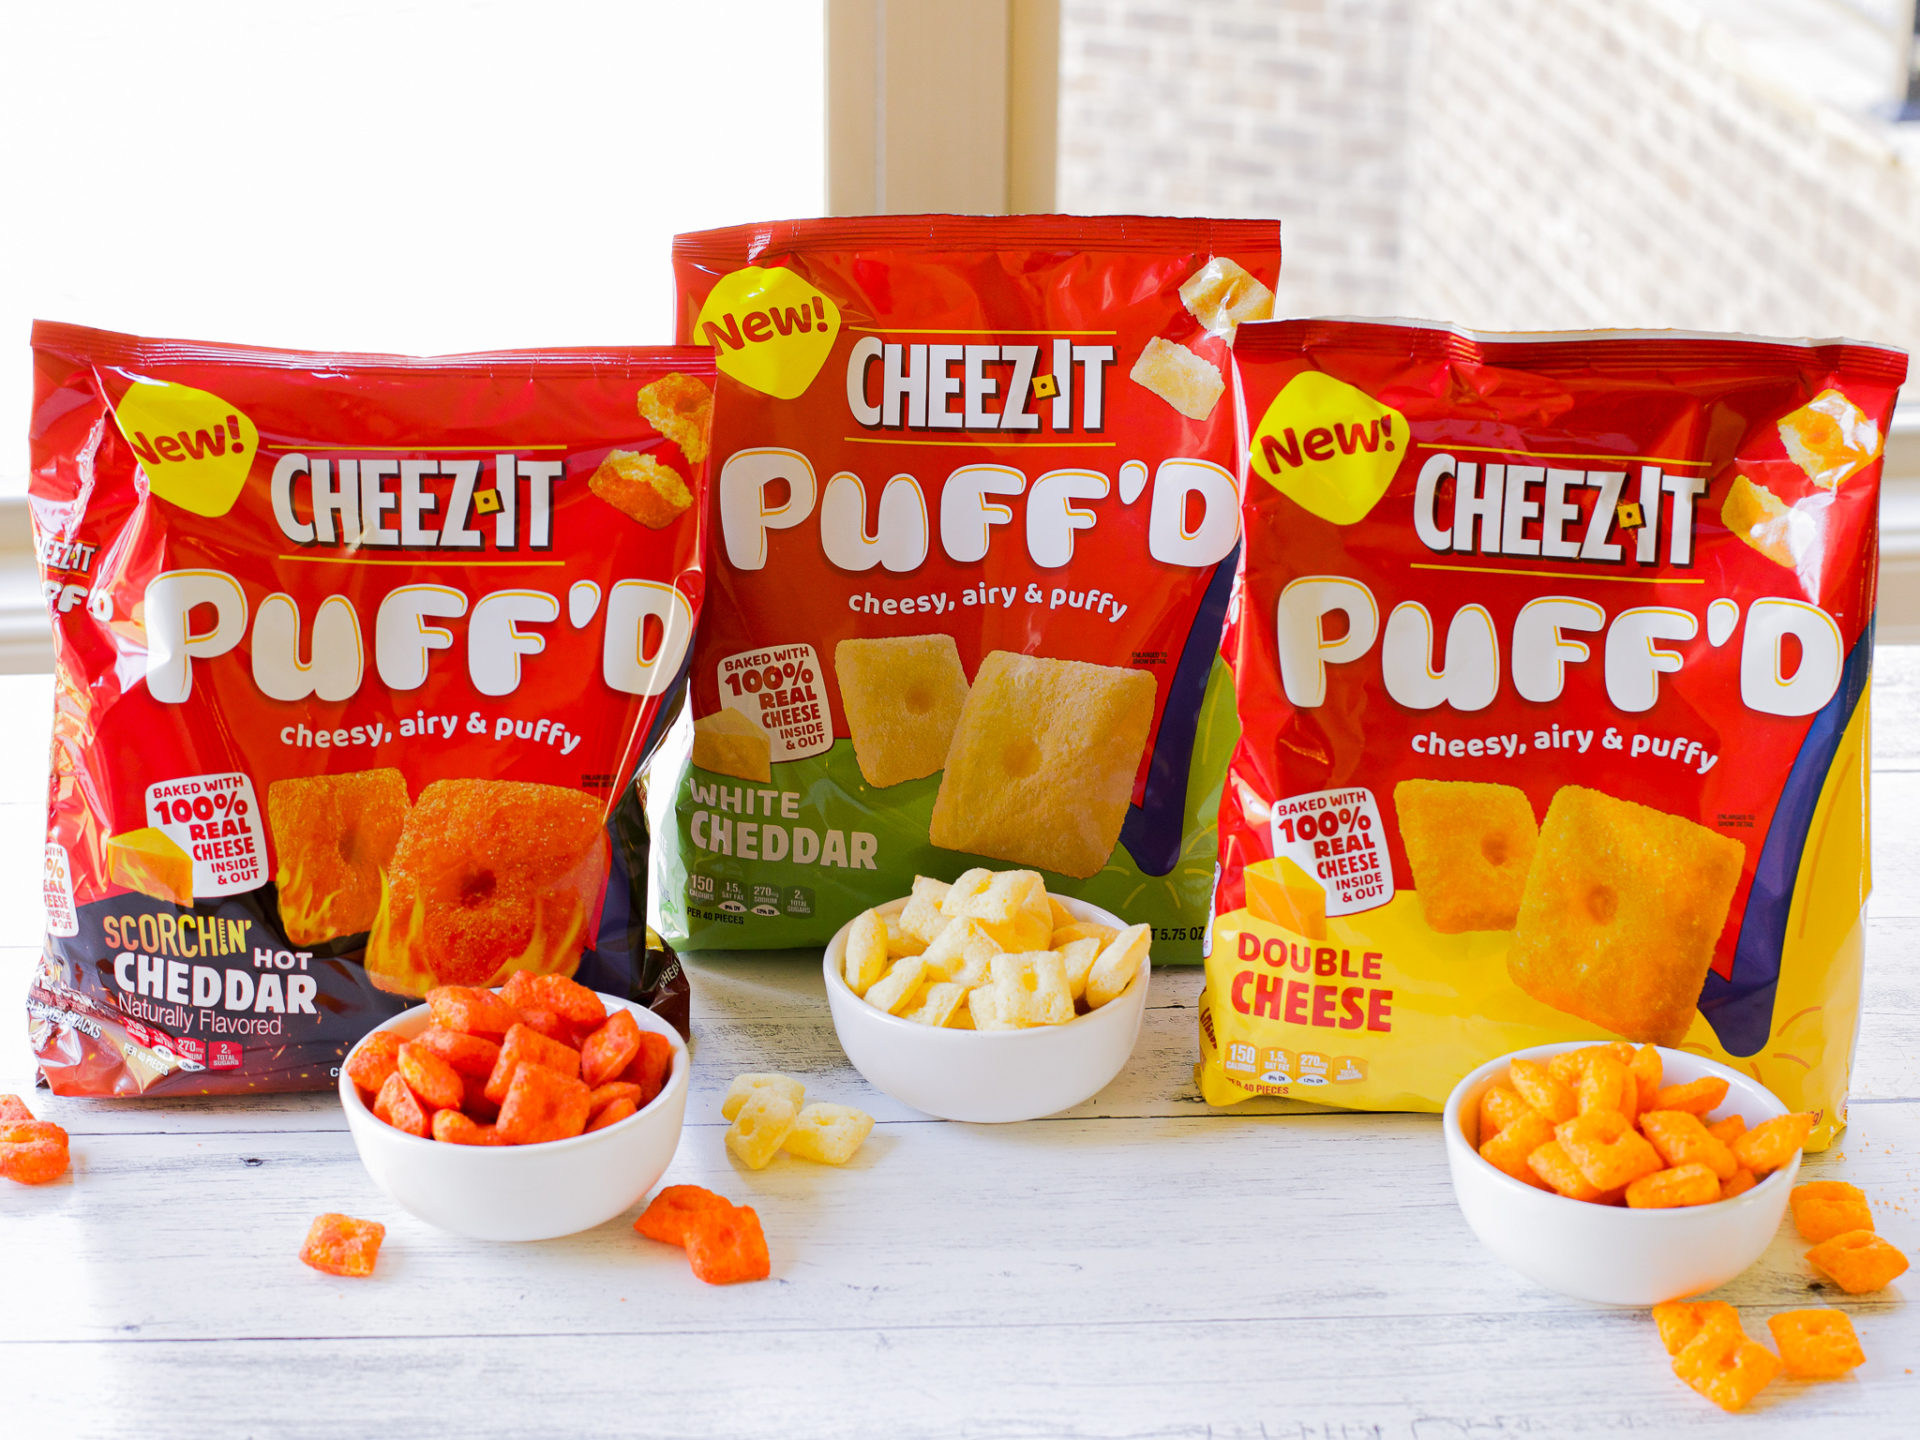 Cheez-It Snap’d Or Puff’d Crackers As Low As $1.99 At Kroger